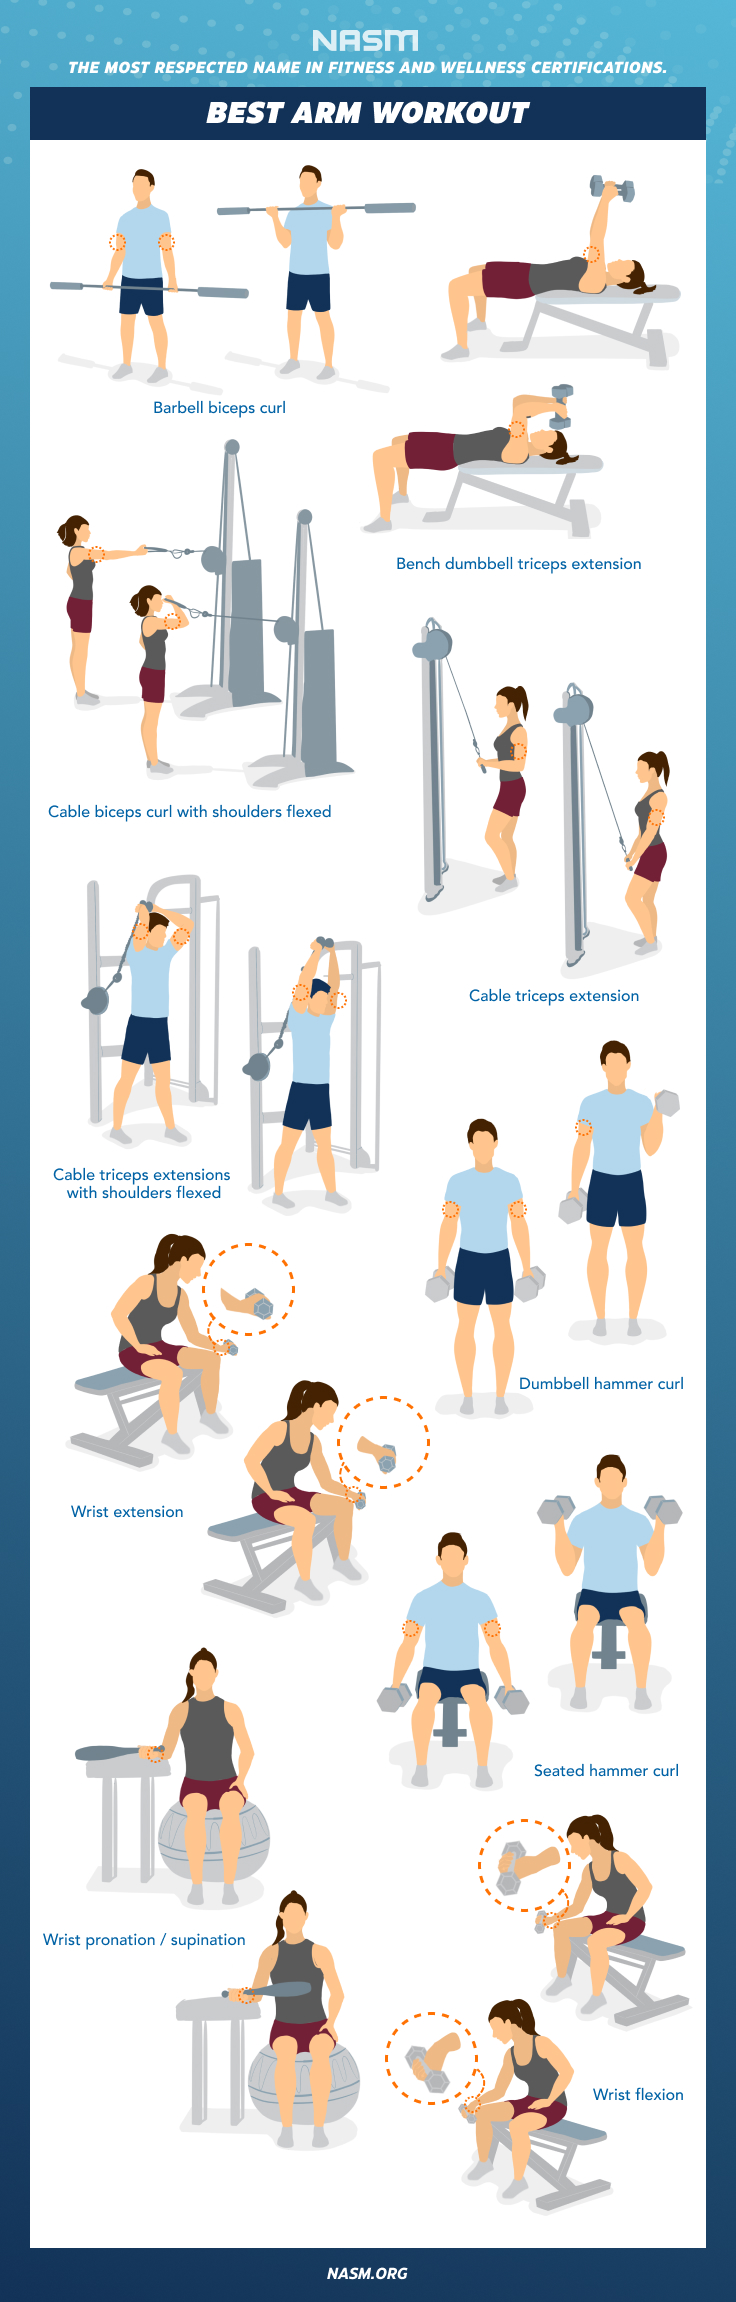 Biceps Workout at gym - 3 Bicep Exercises for Mass  Gym workout chart, Workout  chart, Shoulder workout